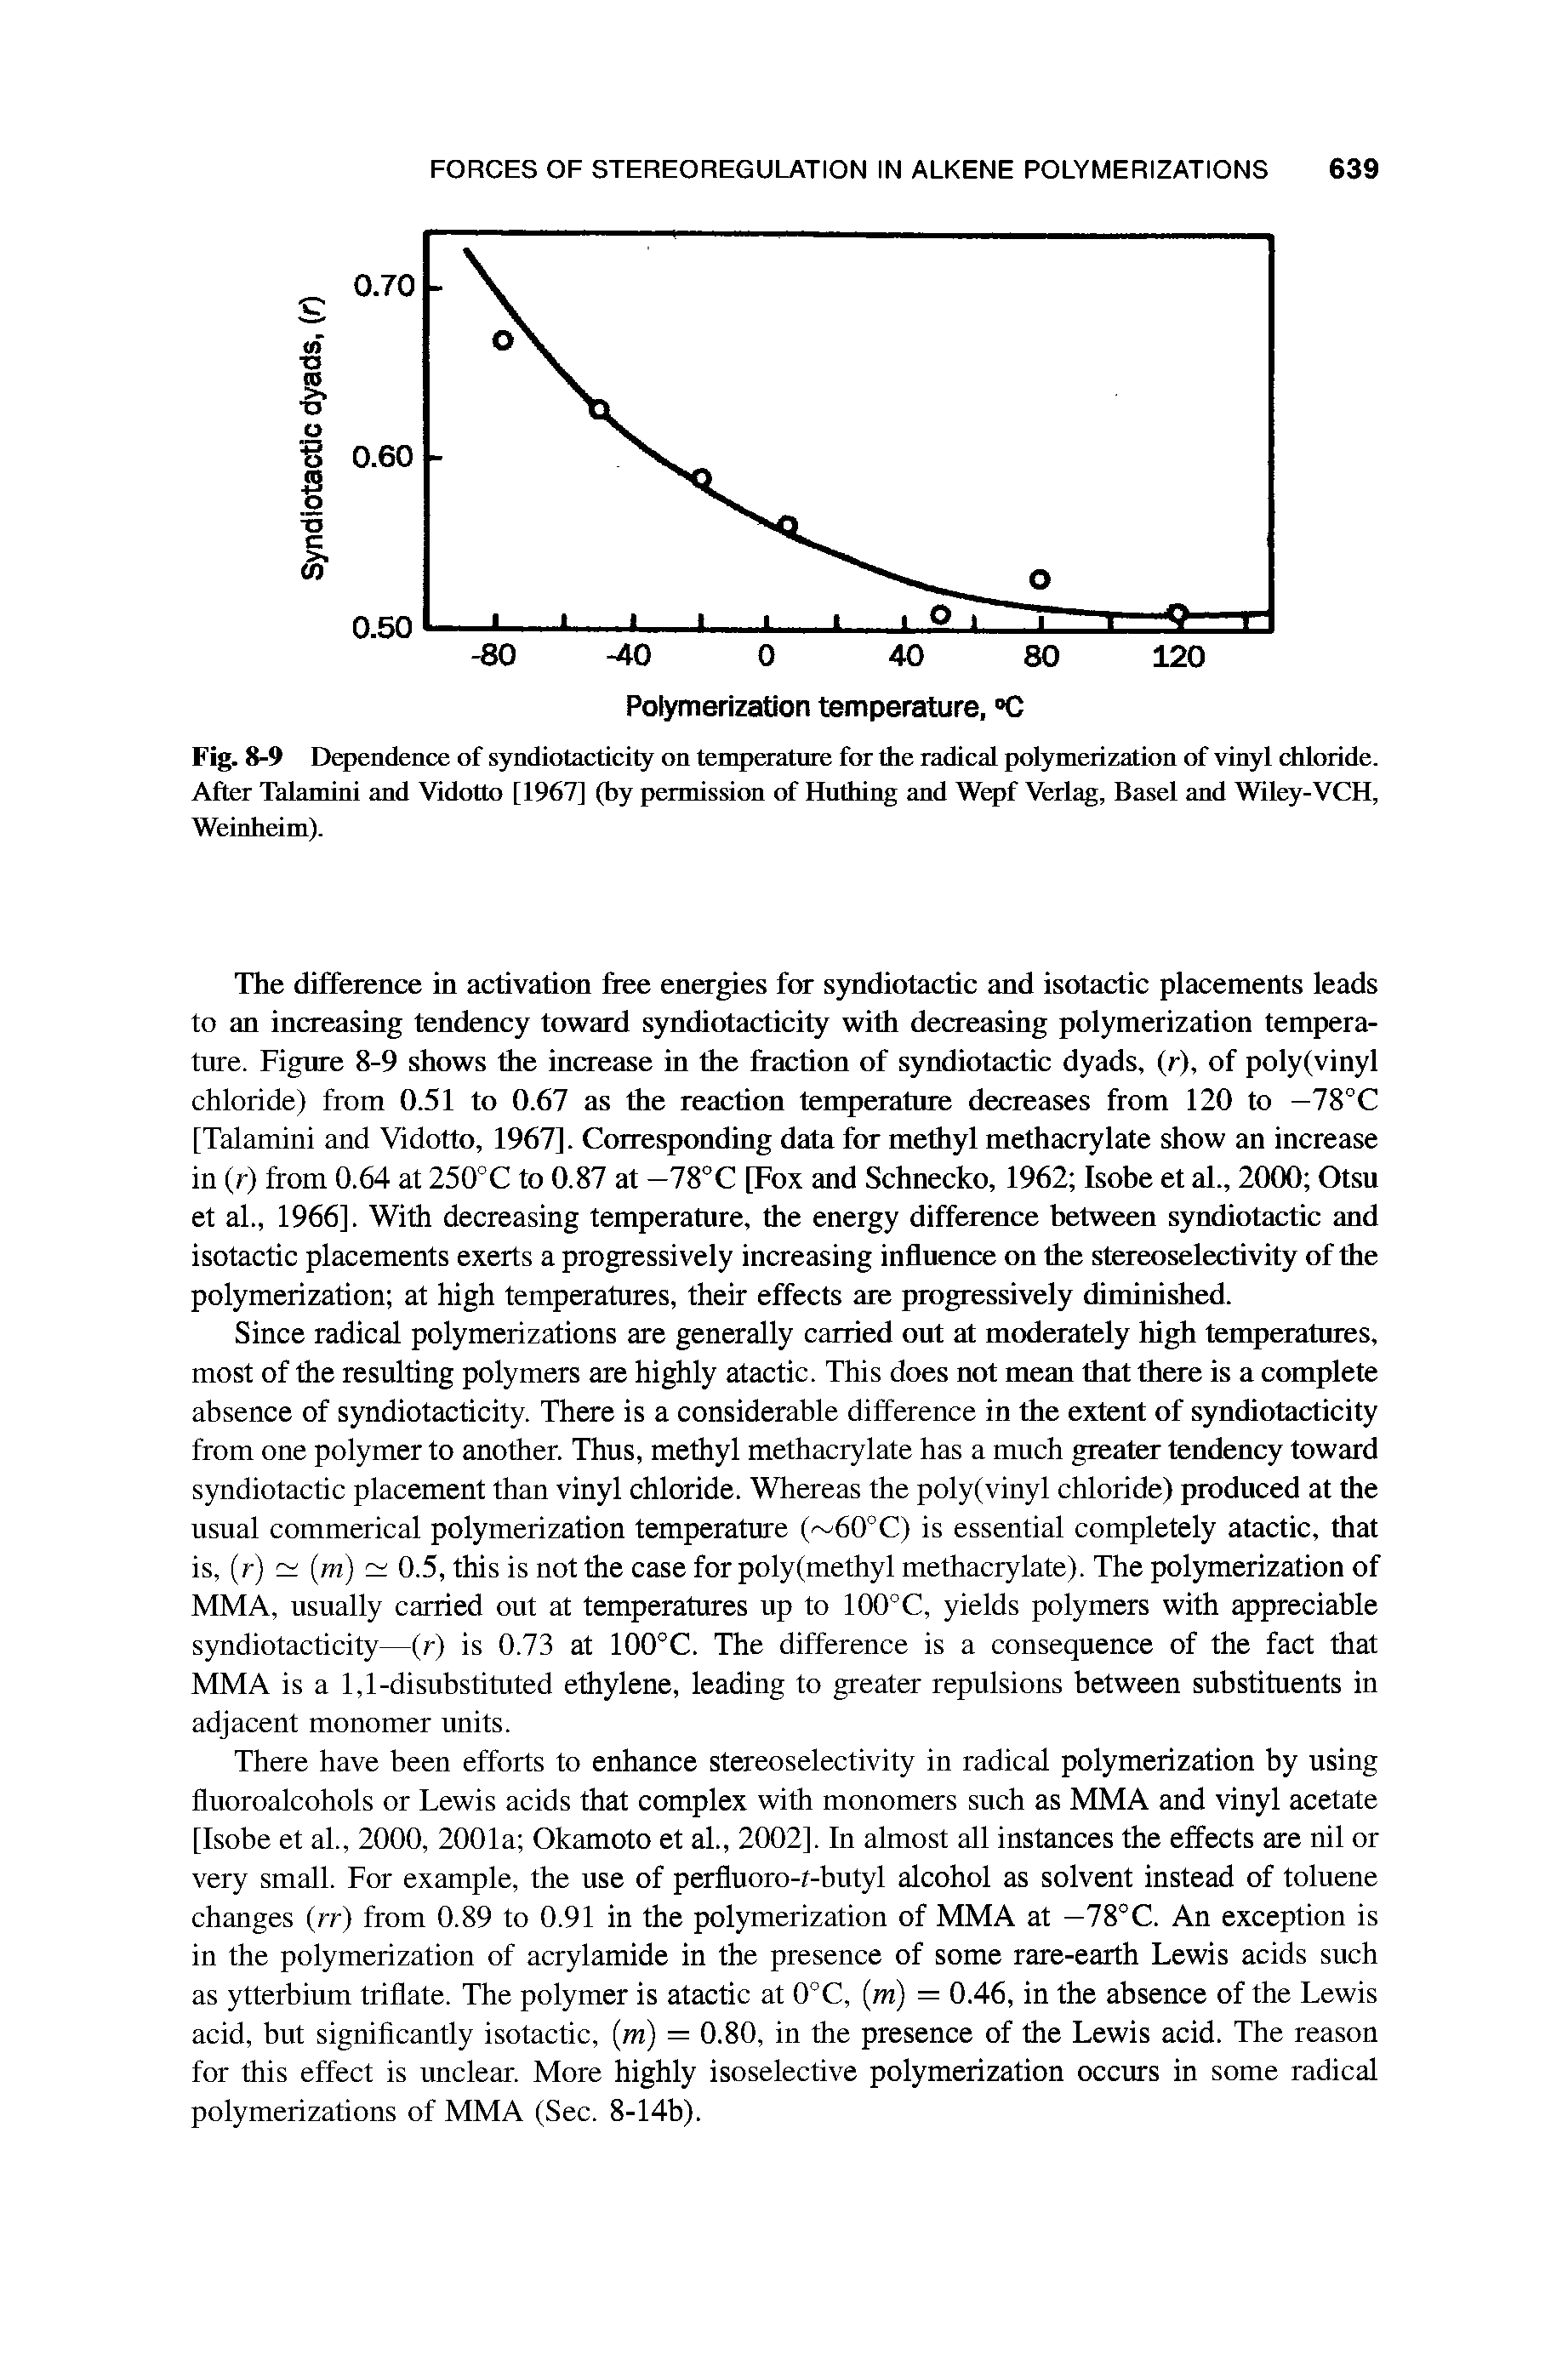 Fig. 8-9 Dependence of syndiotacticity on temperature for the radical polymerization of vinyl chloride. After Talamini and Vidotto [1967] (by permission of Huthing and Wepf Verlag, Basel and Wiley-VCH, Weinheim).